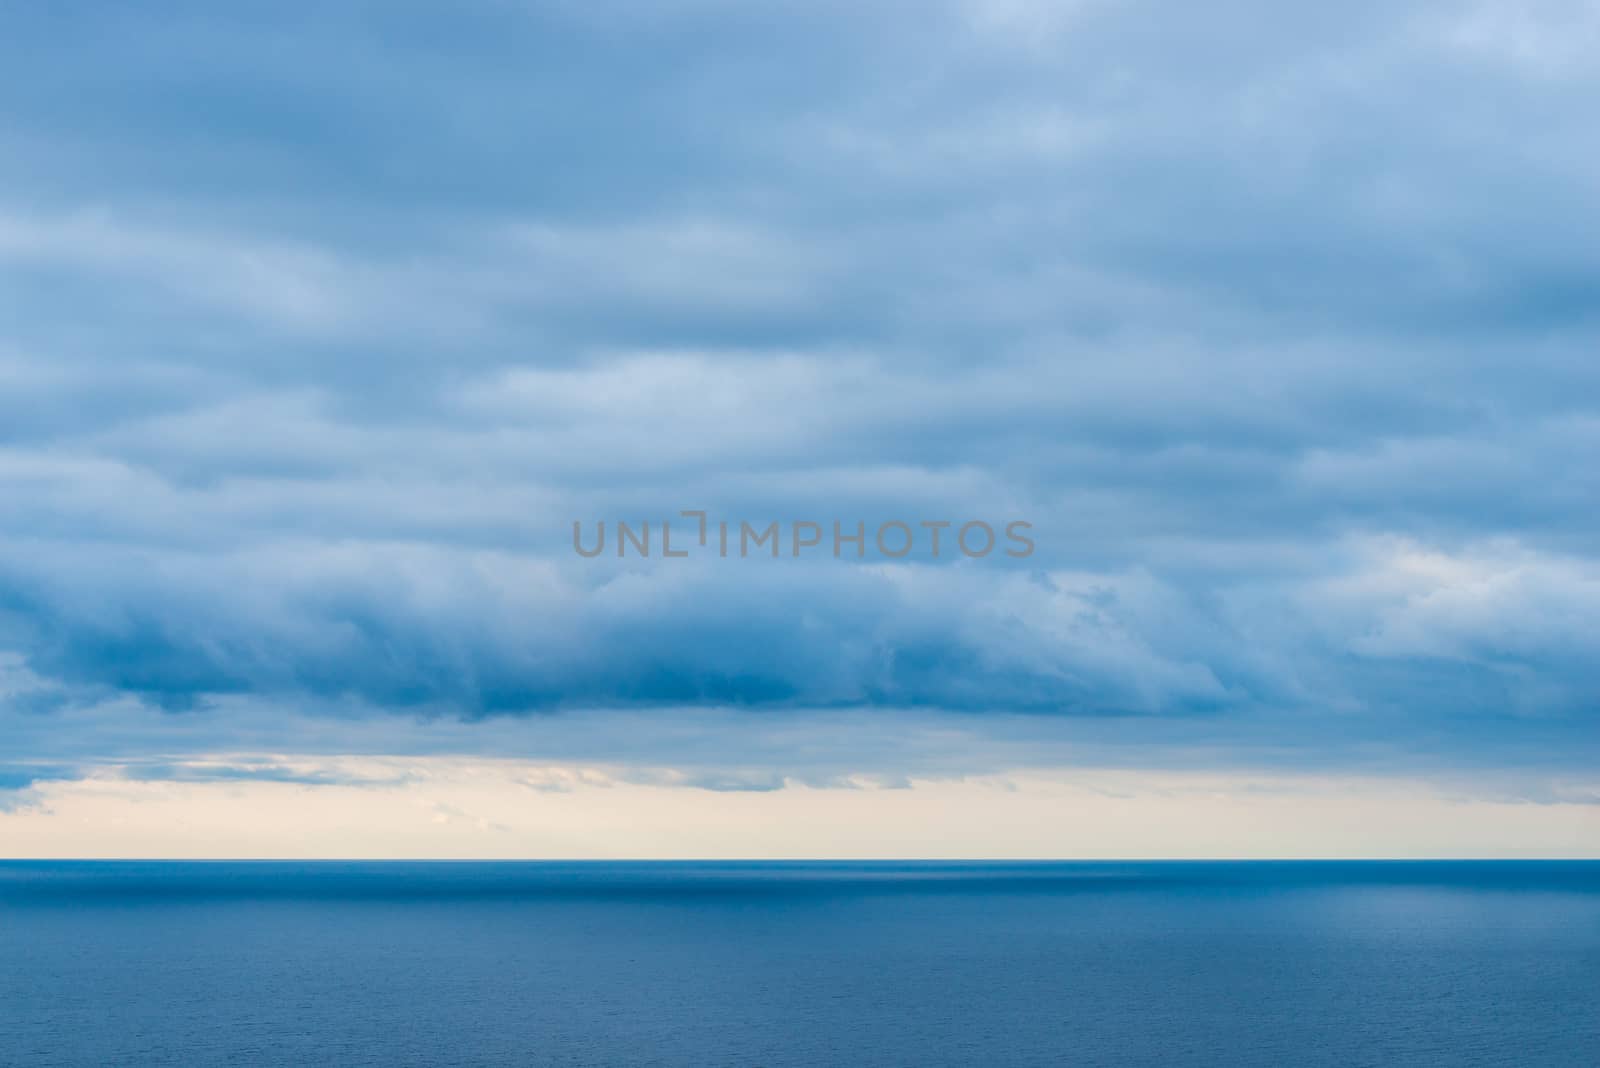 Landscape of the sea, view of the horizon, heavy rain clouds ove by kosmsos111